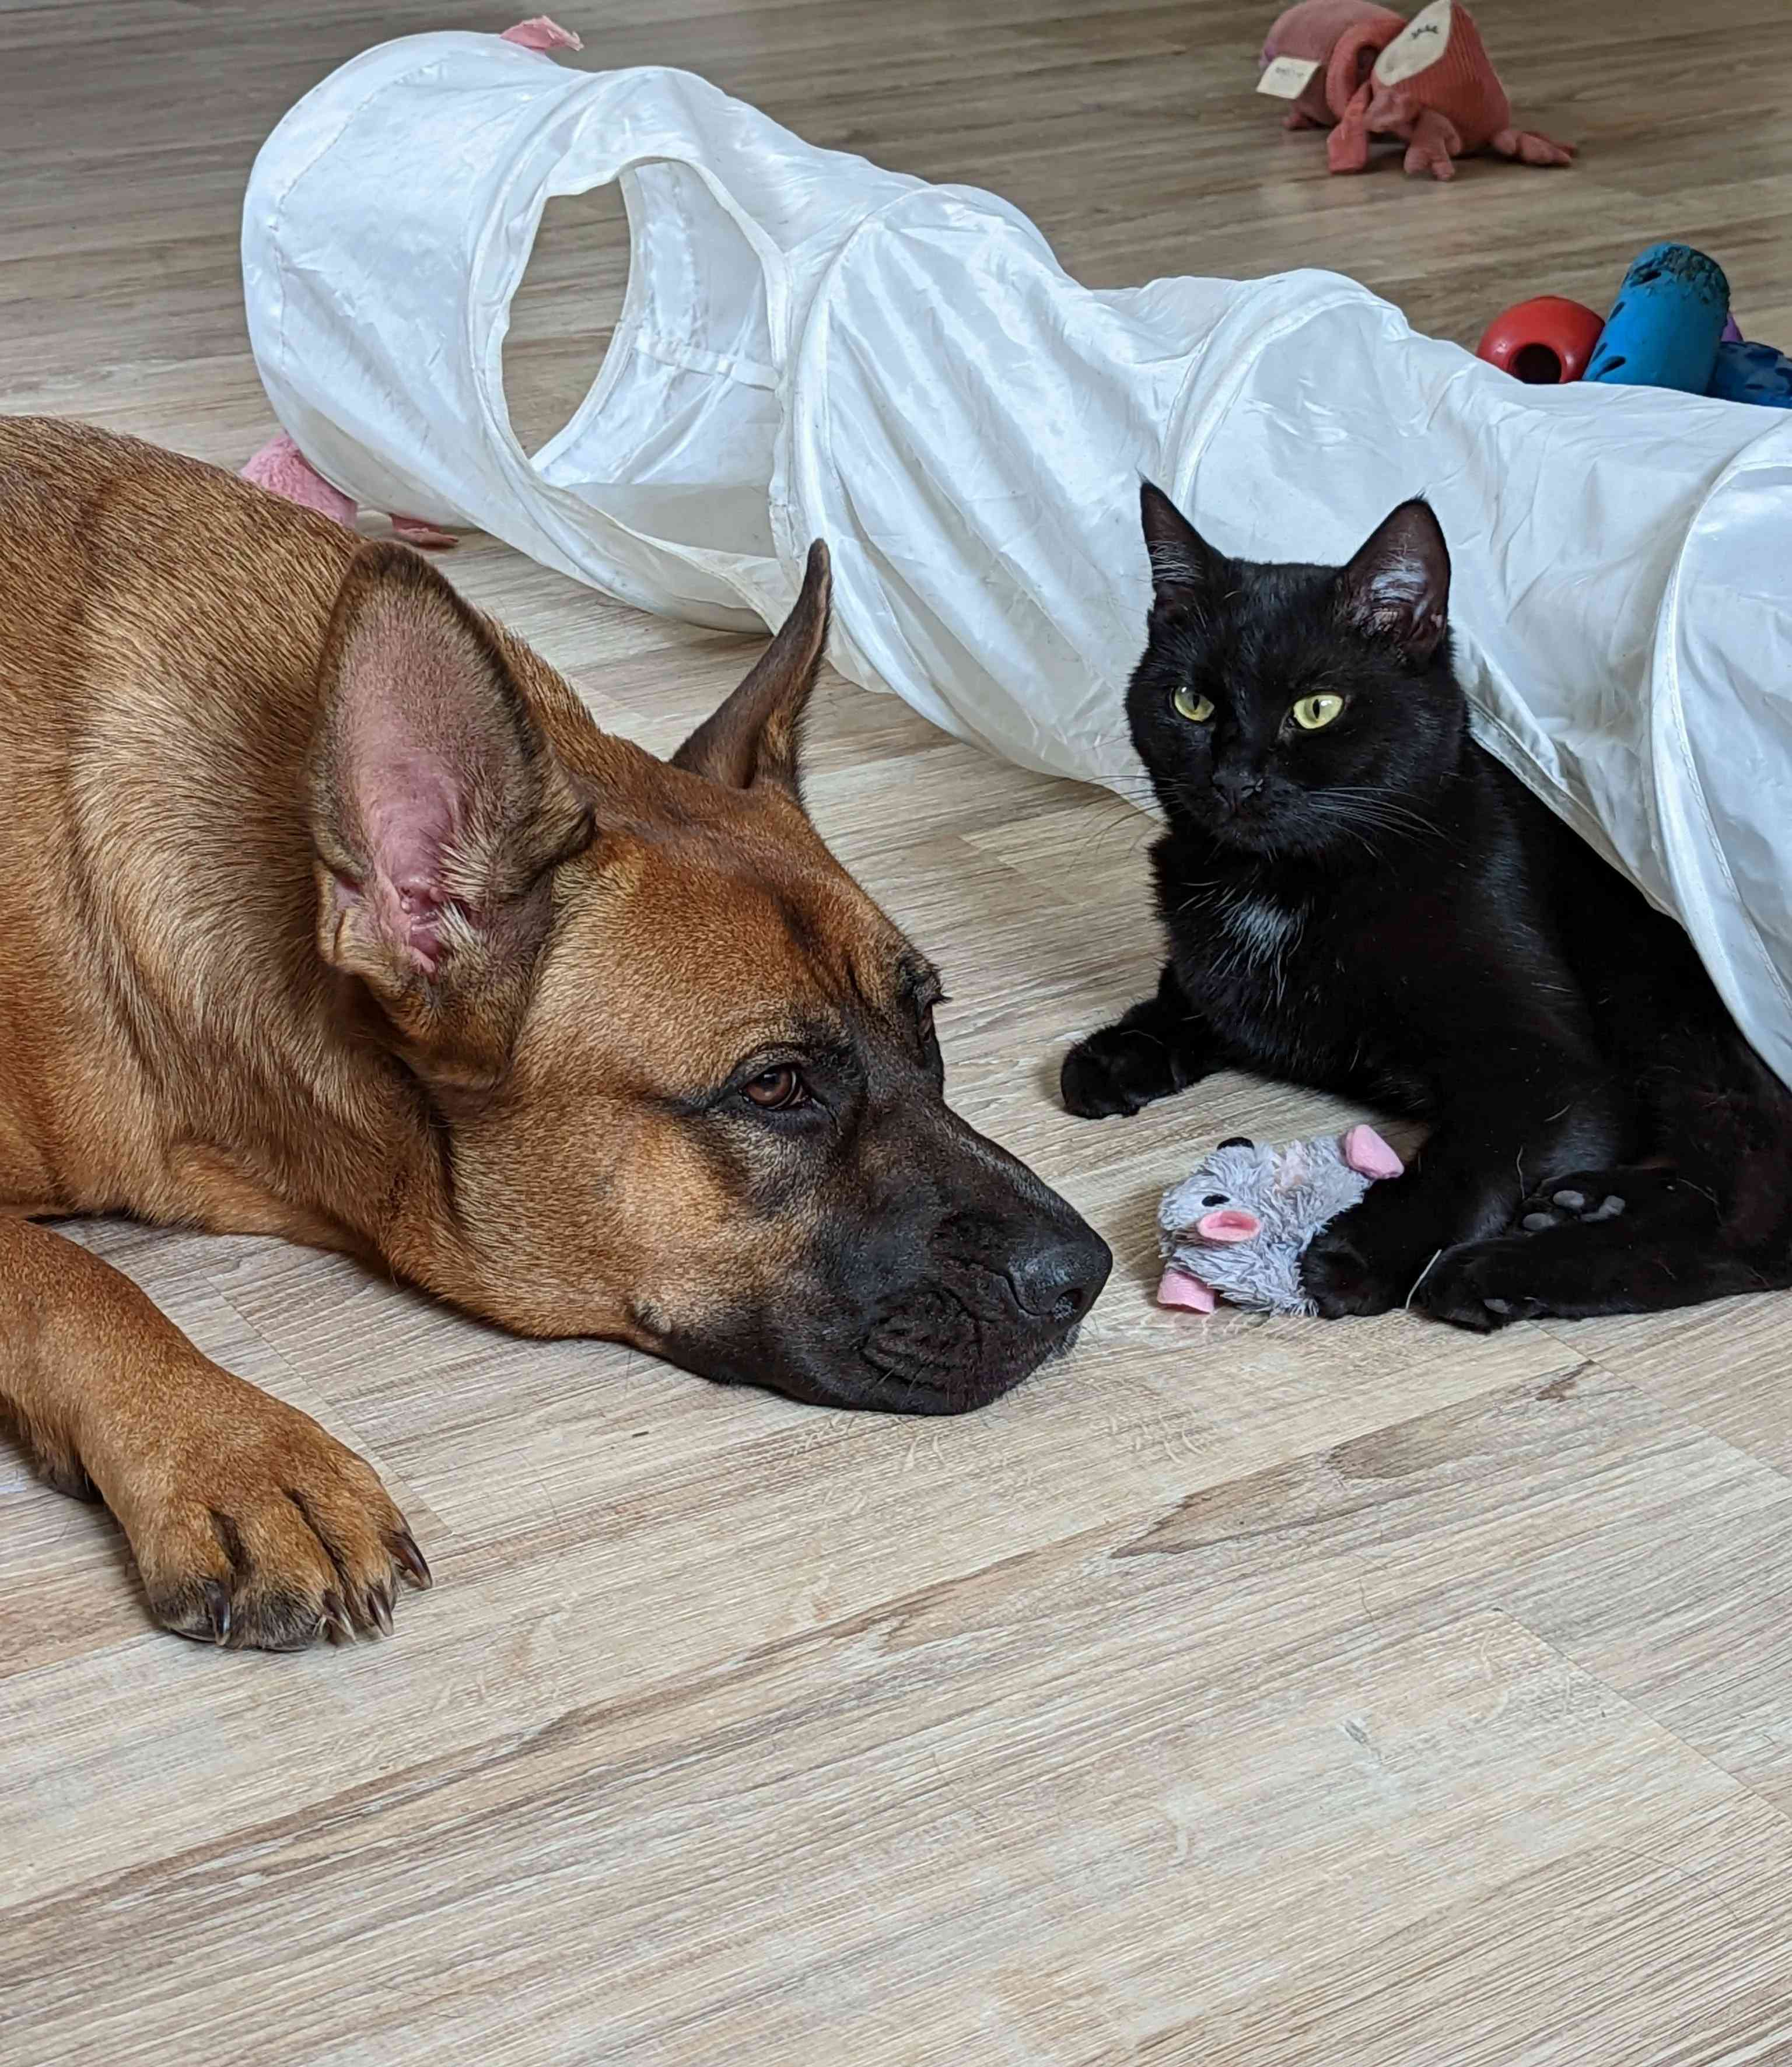 Photos of my animals, Soueï (German Shepherd and Dogue de Bordeaux cross dog) and Shadow (Black Cat)